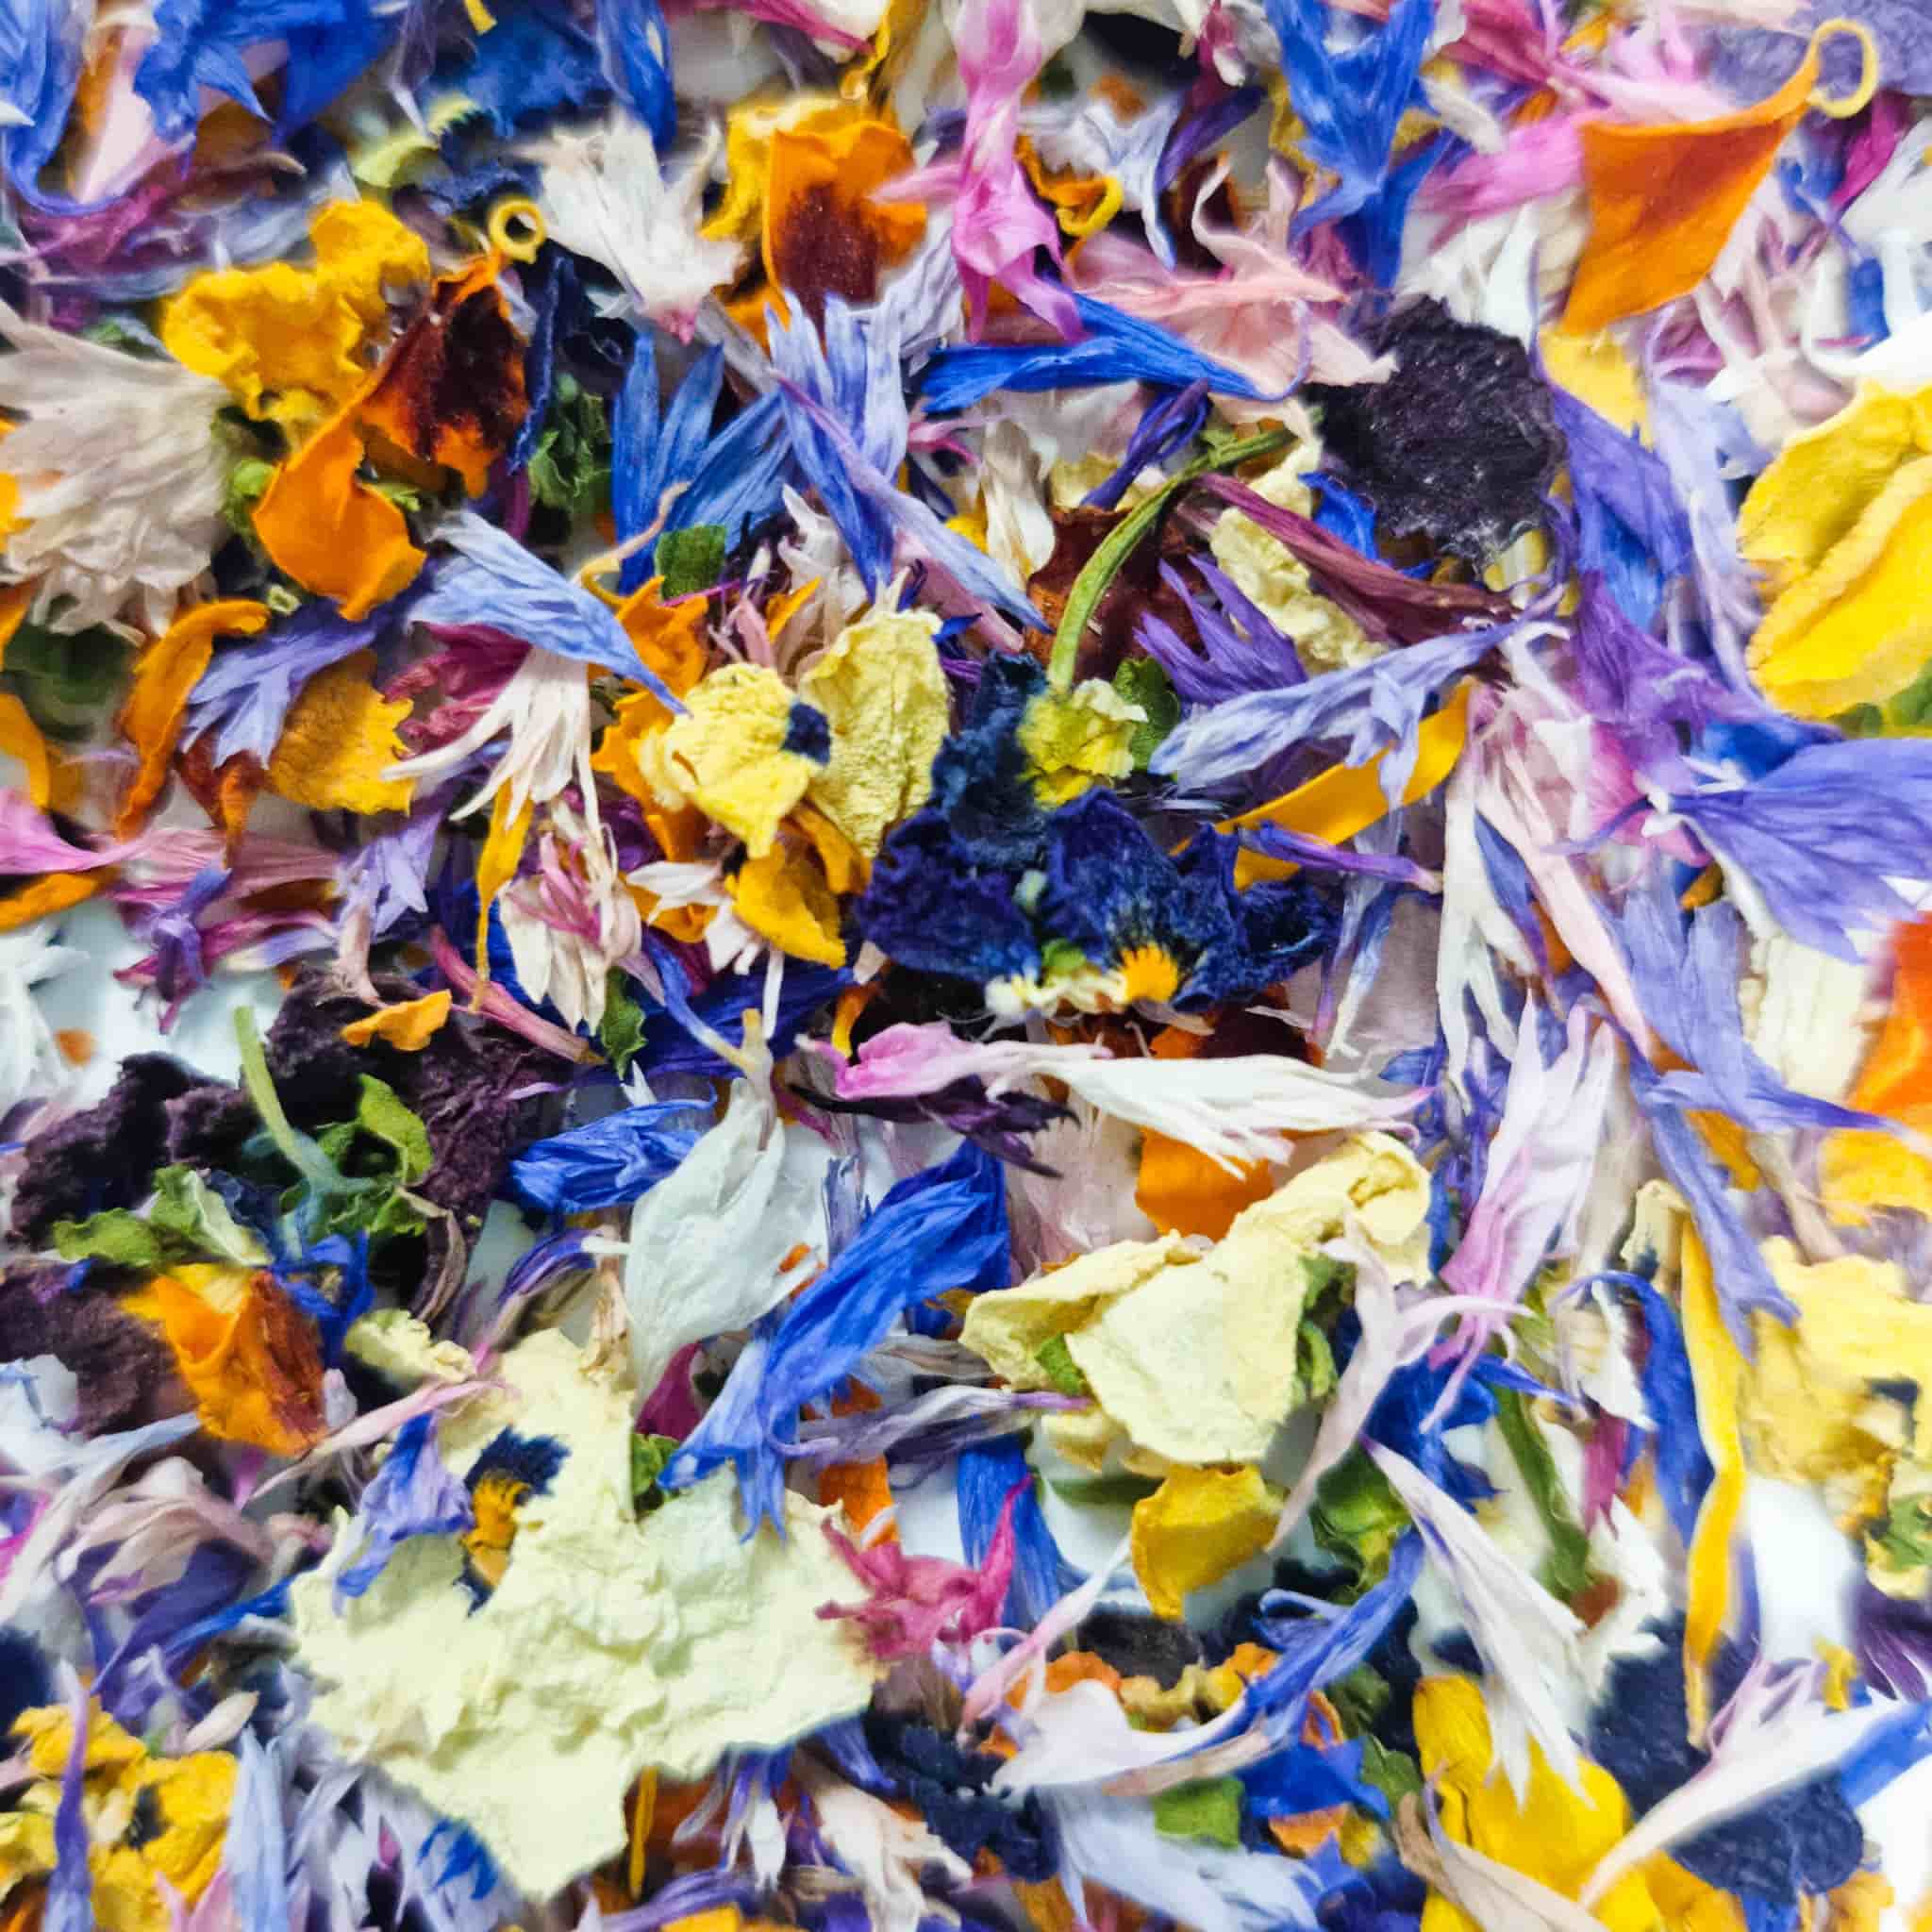 Pixie Mix, Dried Edible Flowers and Leaves